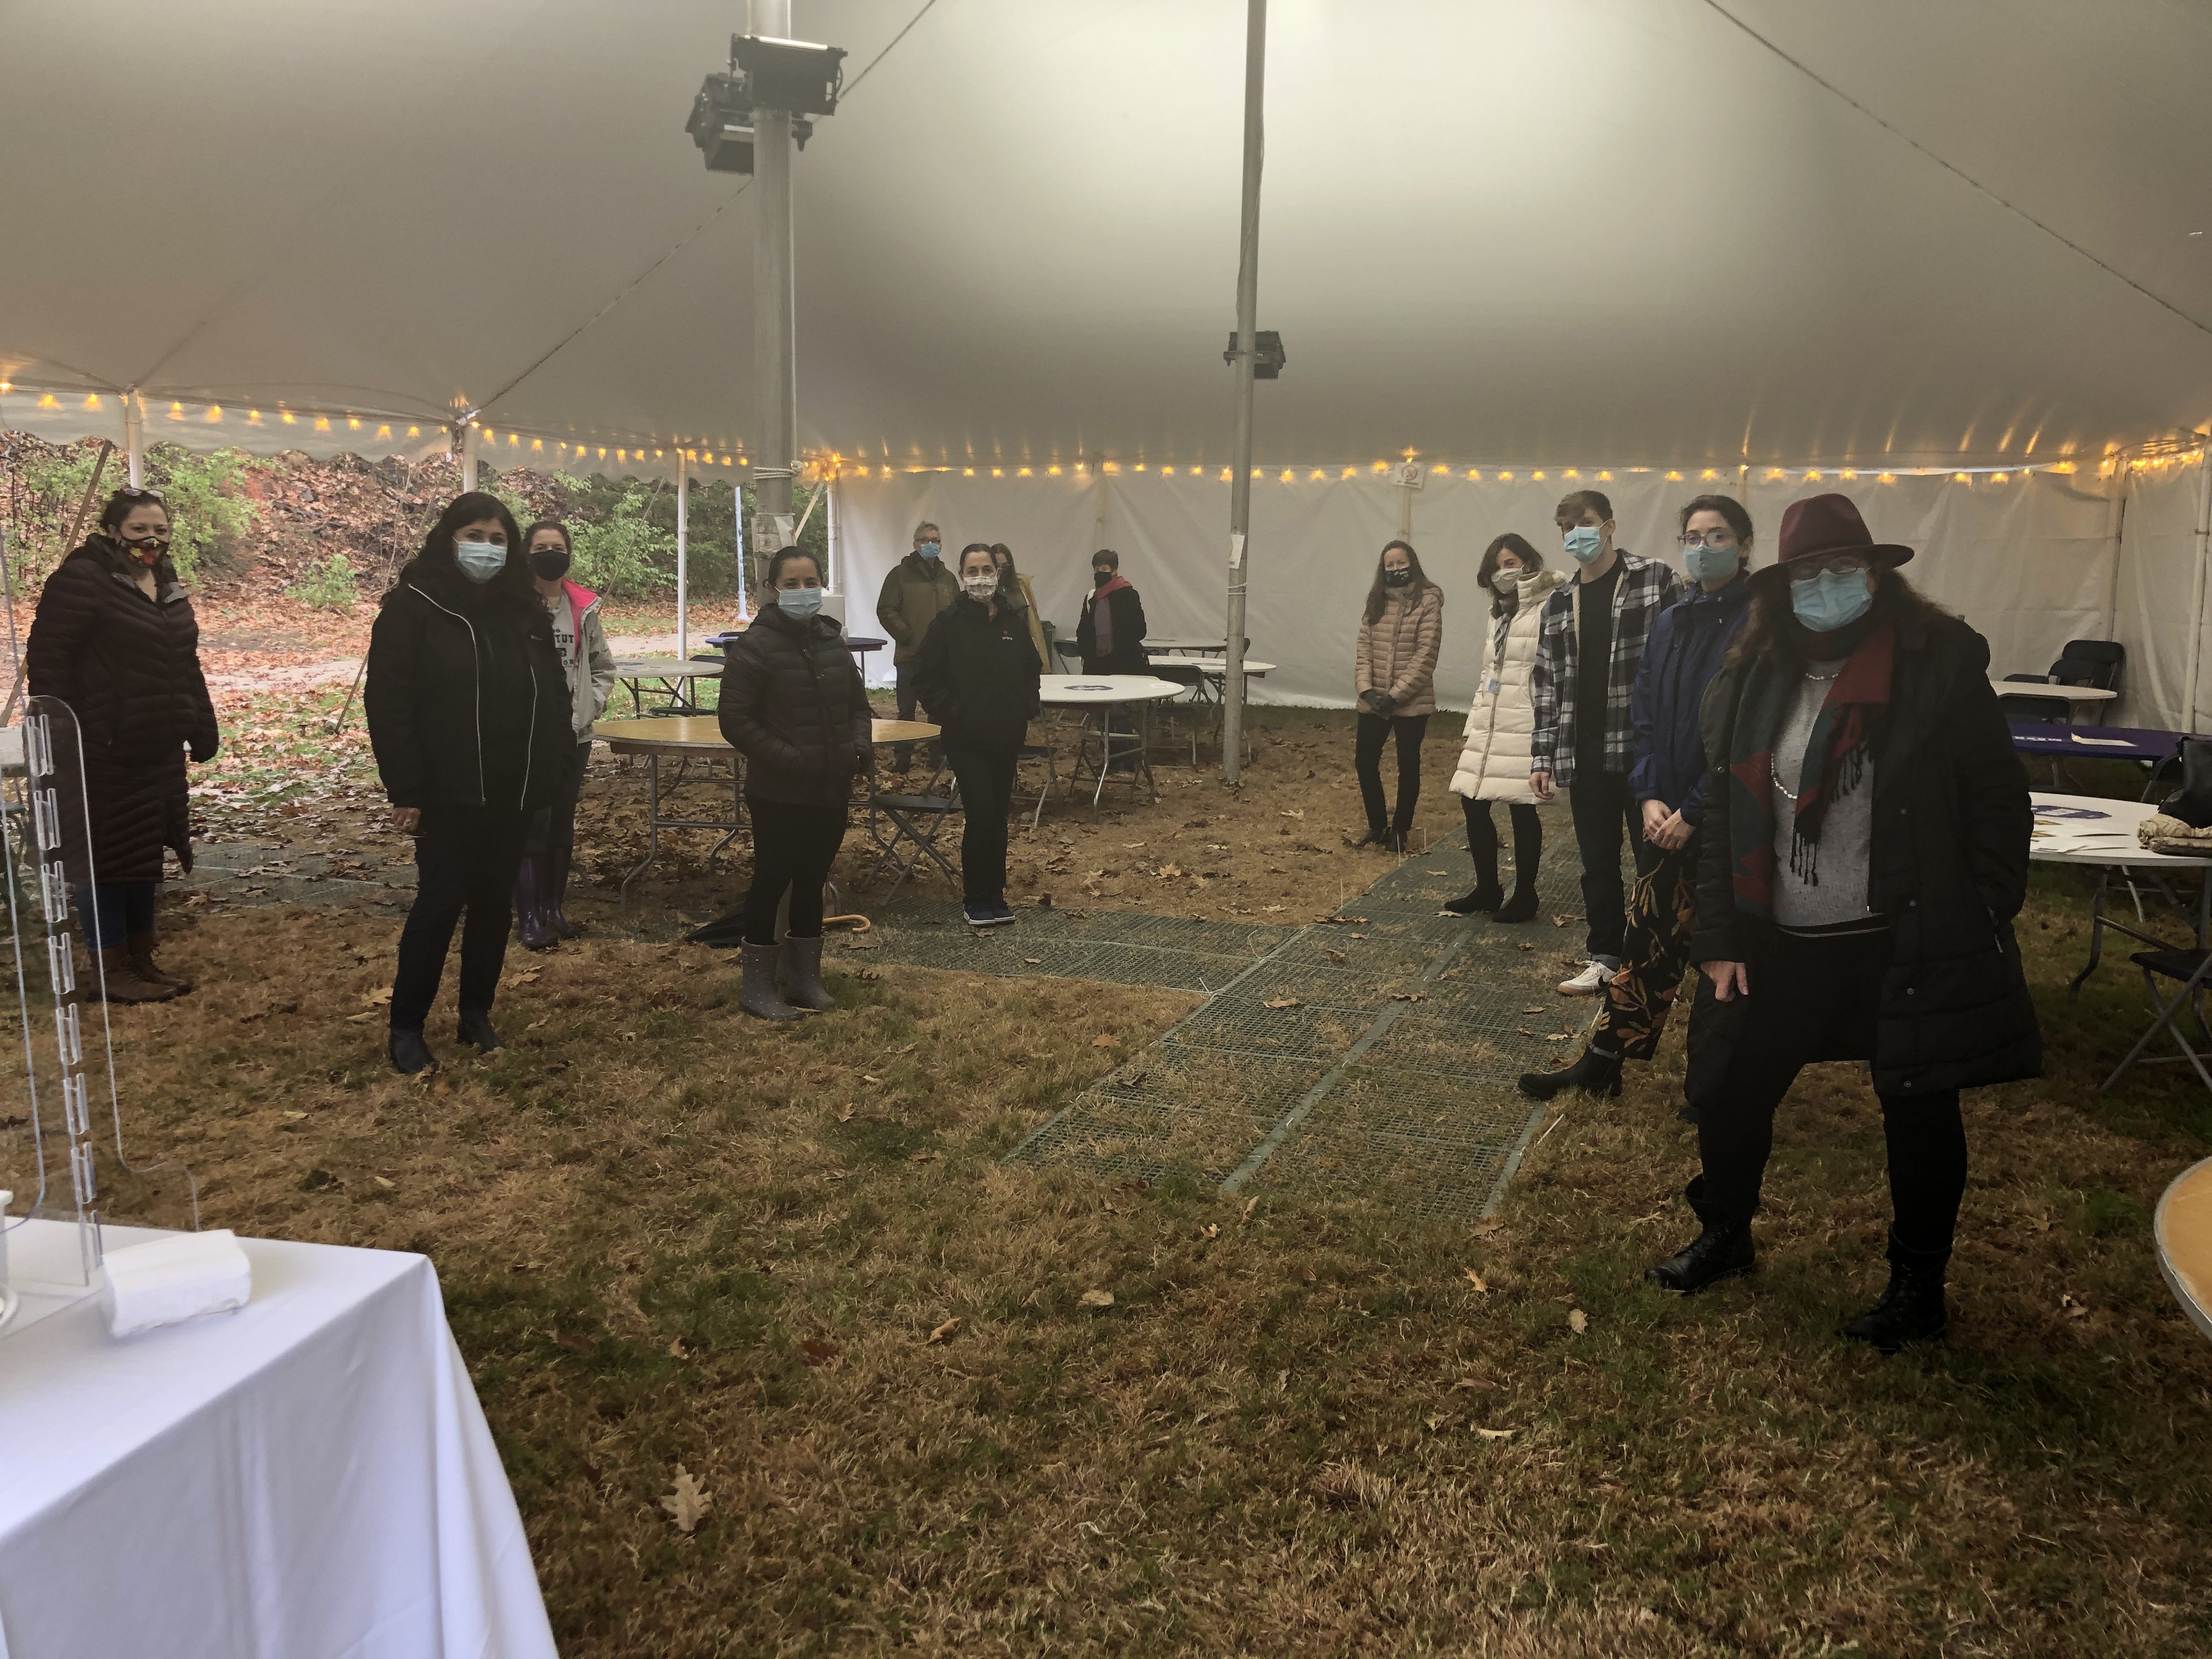 photo of ROMS faculty, staff and students at tent event on November 13, 2020